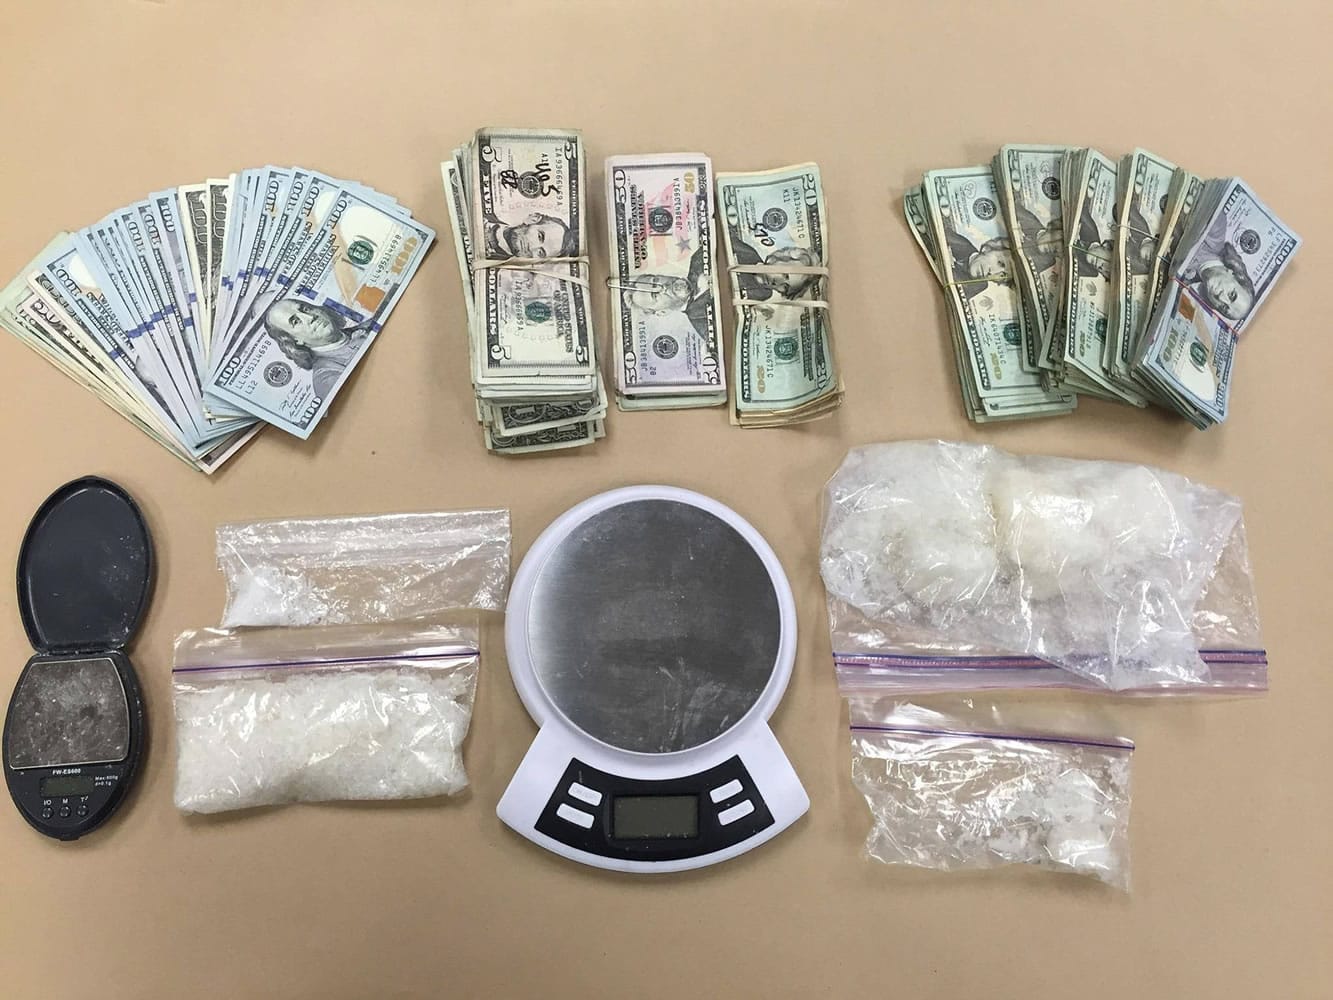 The Clark Vancouver Regional Drug Task Force served a search warrant at an east Vancouver residence, where they reported finding one pound of methamphetamine, multiple scales, drug notes and $12,720 in cash.